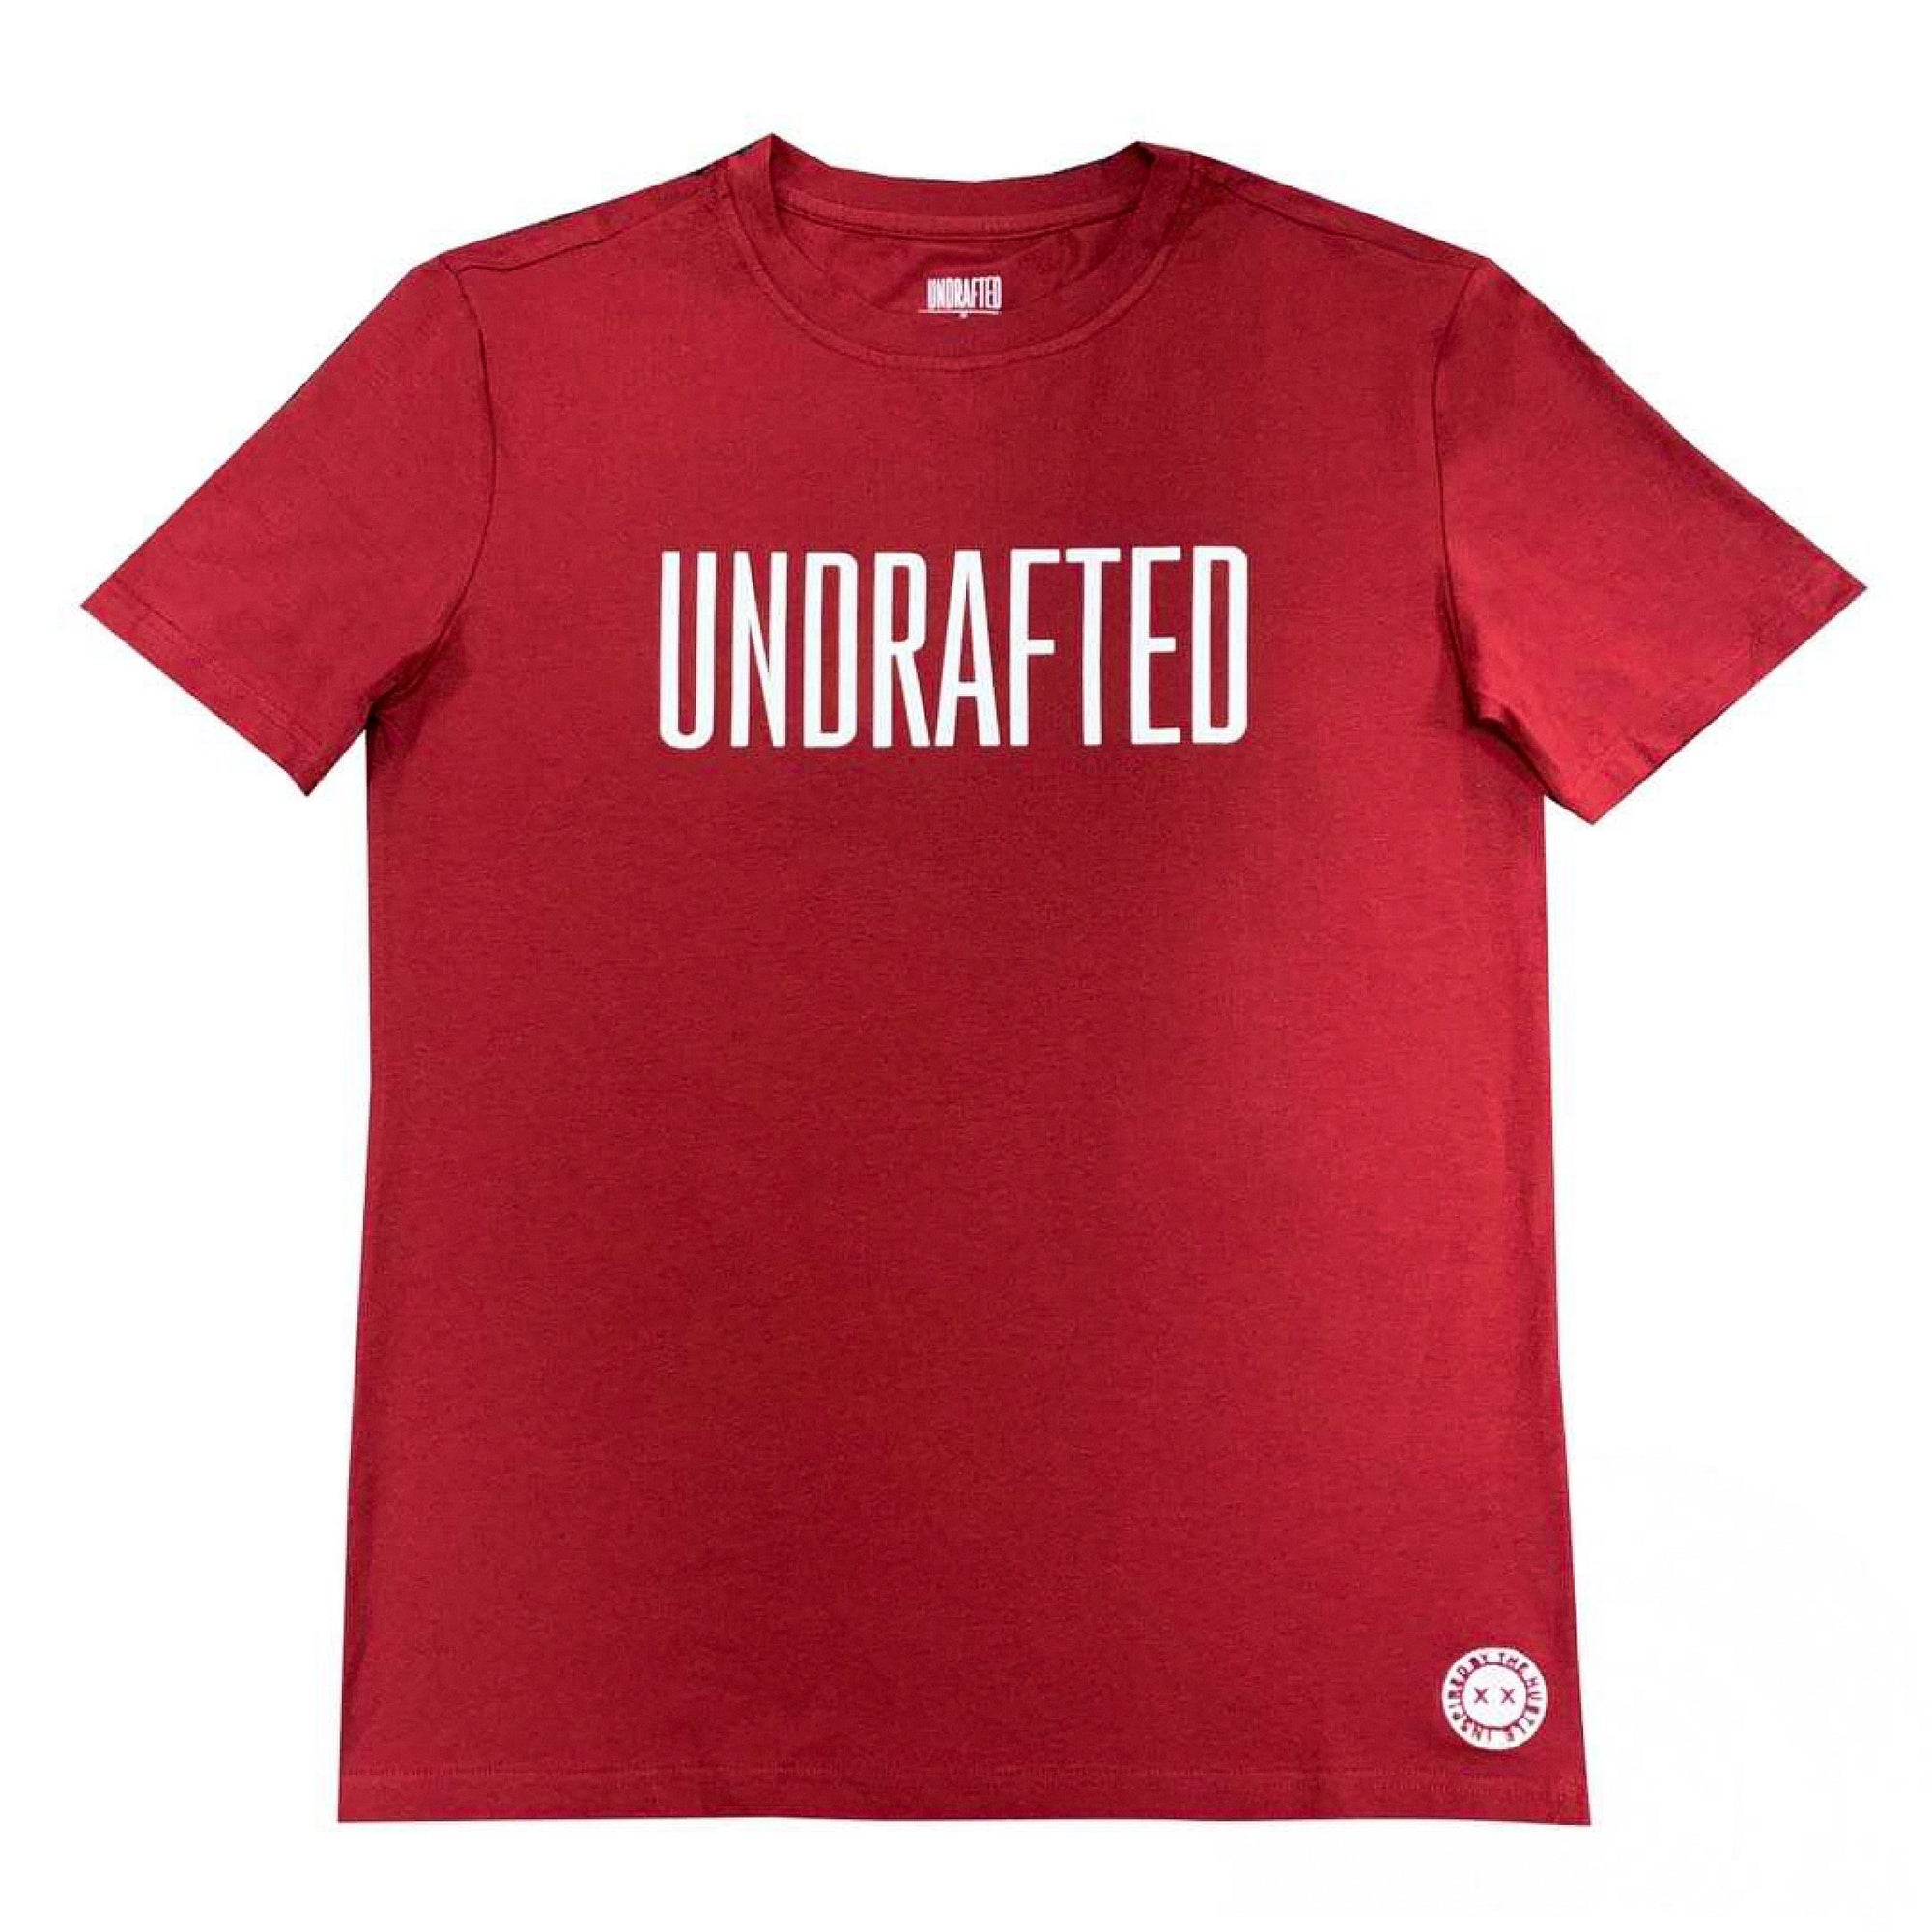 Undrafted T-Shirt Maroon/White